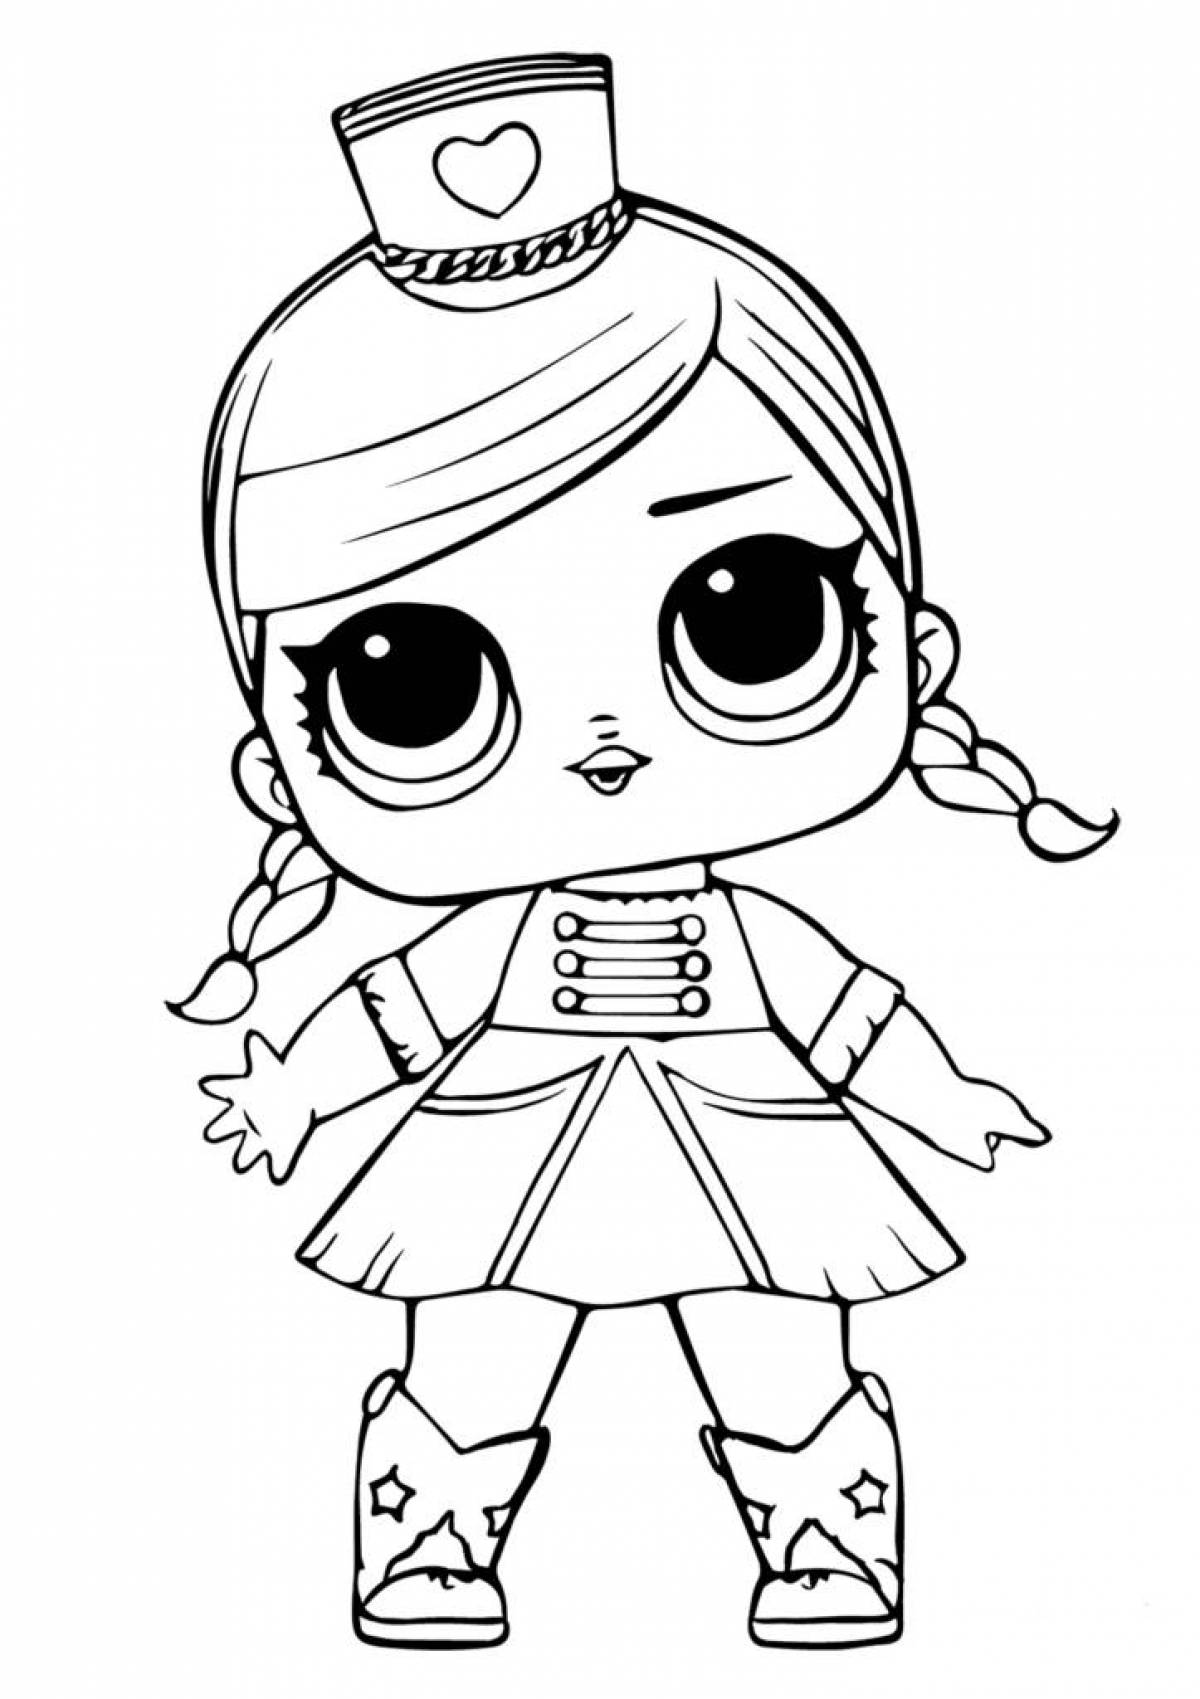 Lola's playful coloring page